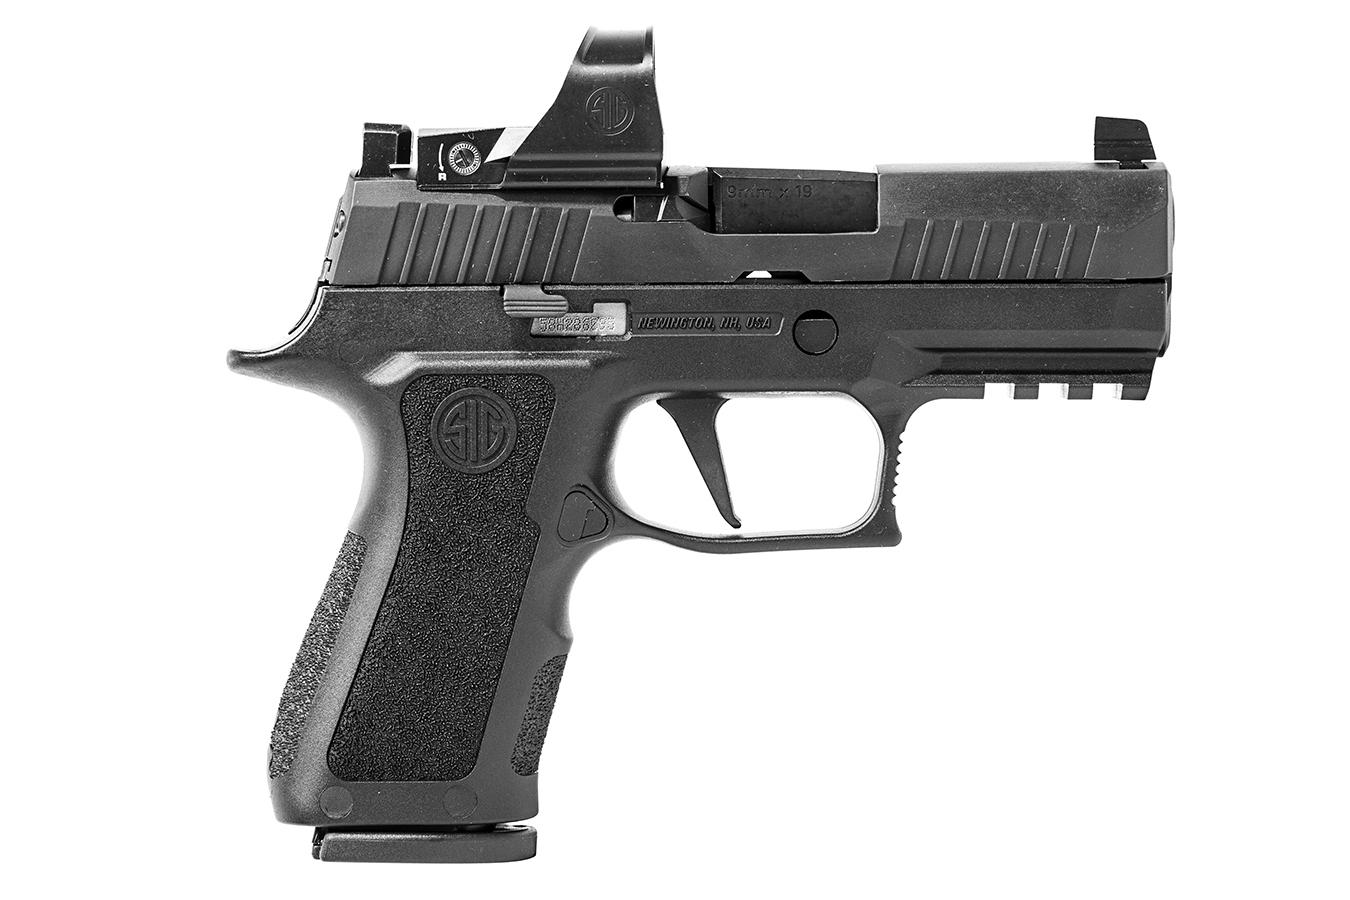 SIG SAUER P320 XCARRY PRO 9MM SEMI-AUTO PISTOL WITH ROMEO1PRO SIGHT (LE)